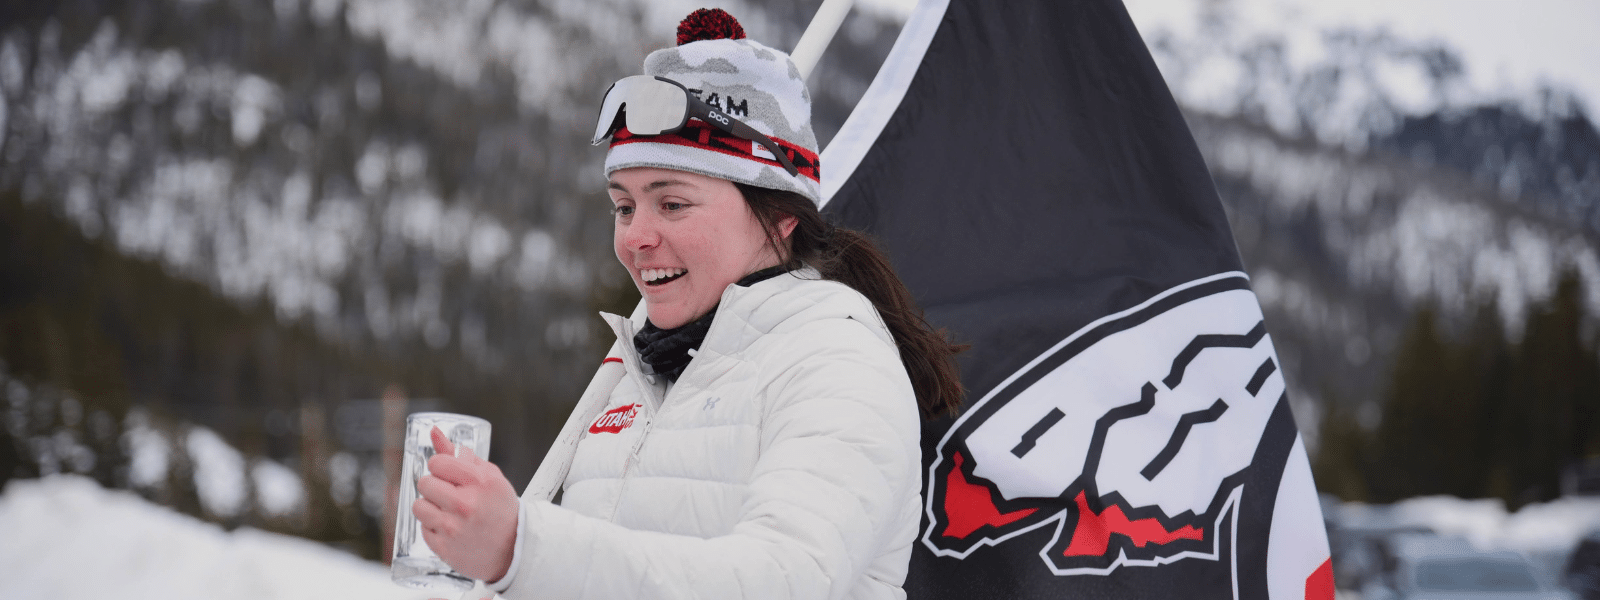 Utes Lead Team Points, But Colorado Buffs Shine Individually at NCAA Championships Slalom on Howelsen Hill